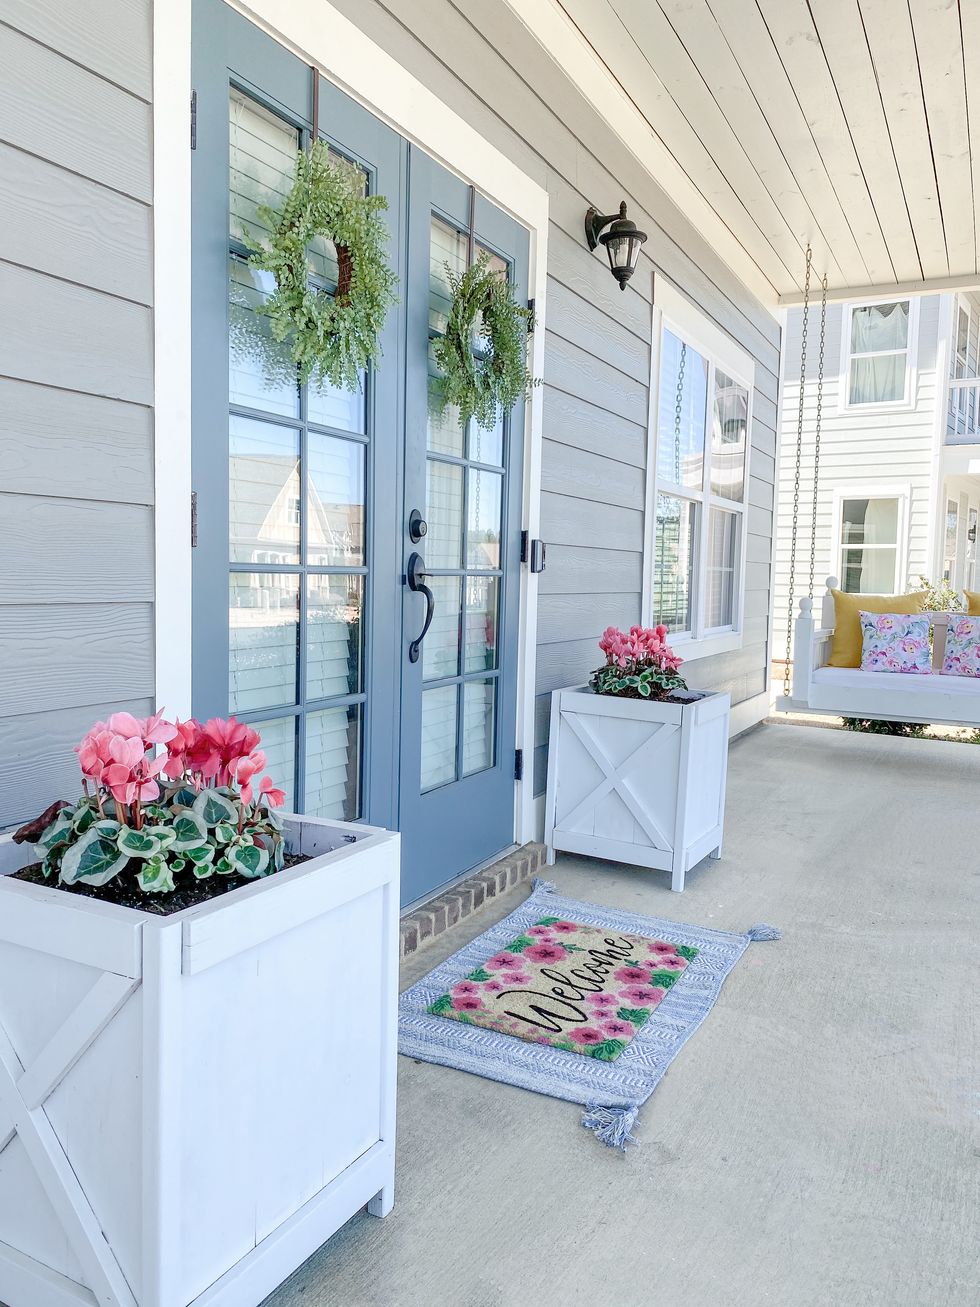 17 Welcoming Ways To Decorate Your Front Porch - Front Porch Ideas